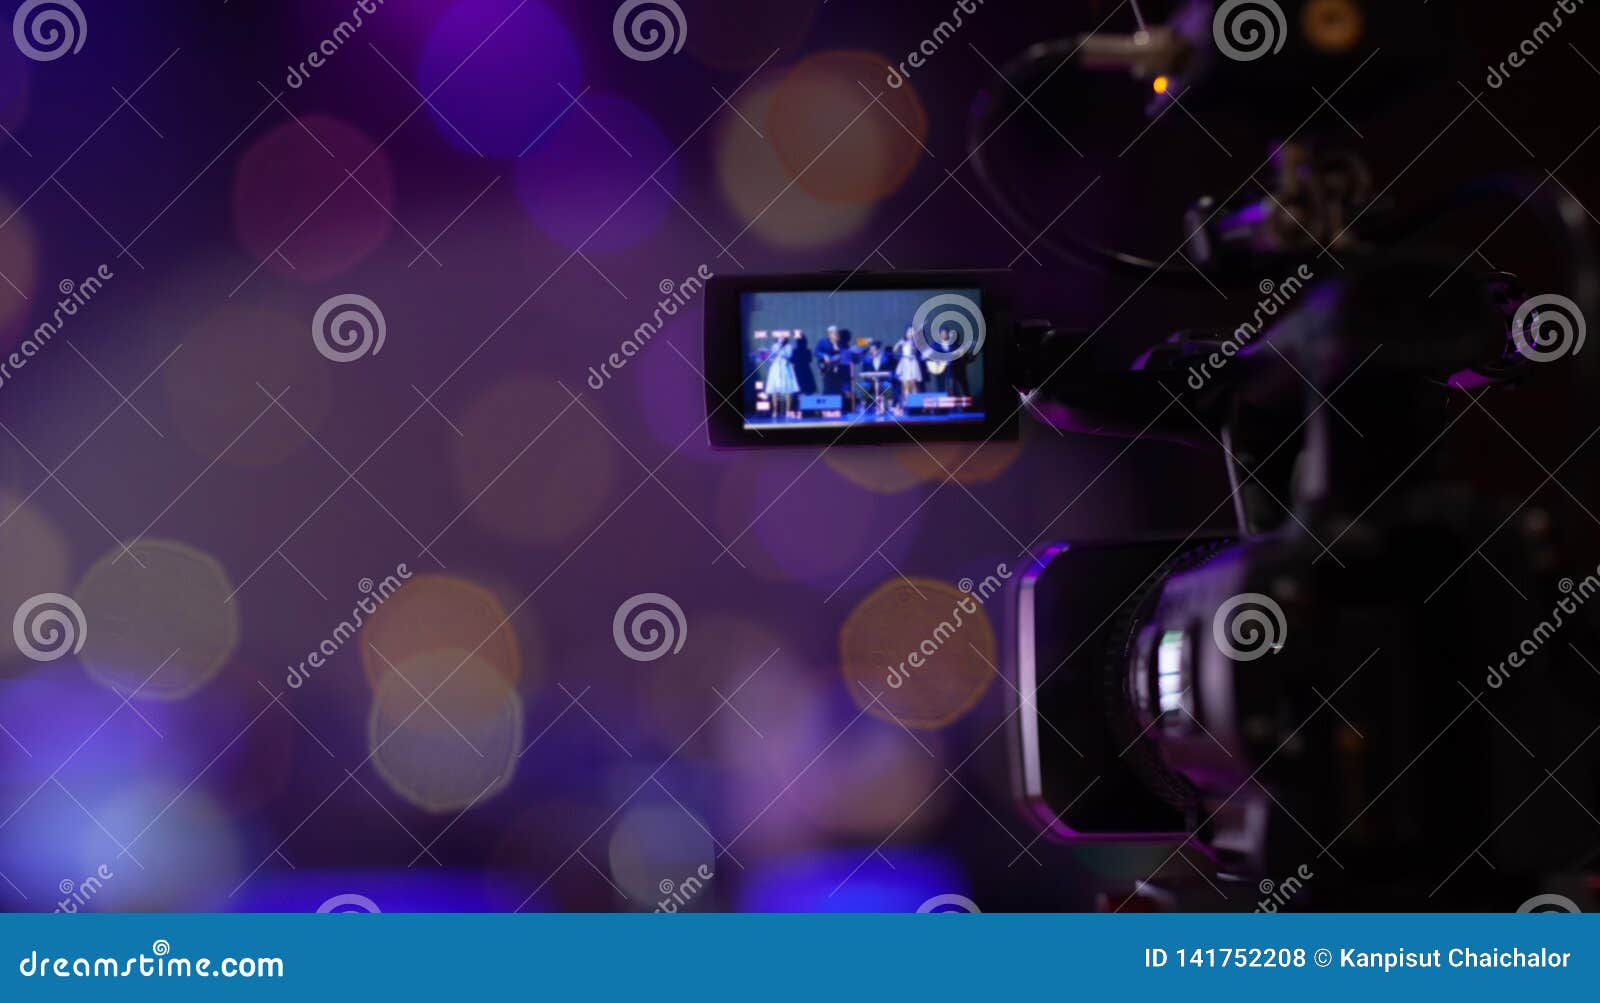 soft and blur focus camera show viewfinder image catch motion in interview or broadcast wedding ceremony,bokeh background